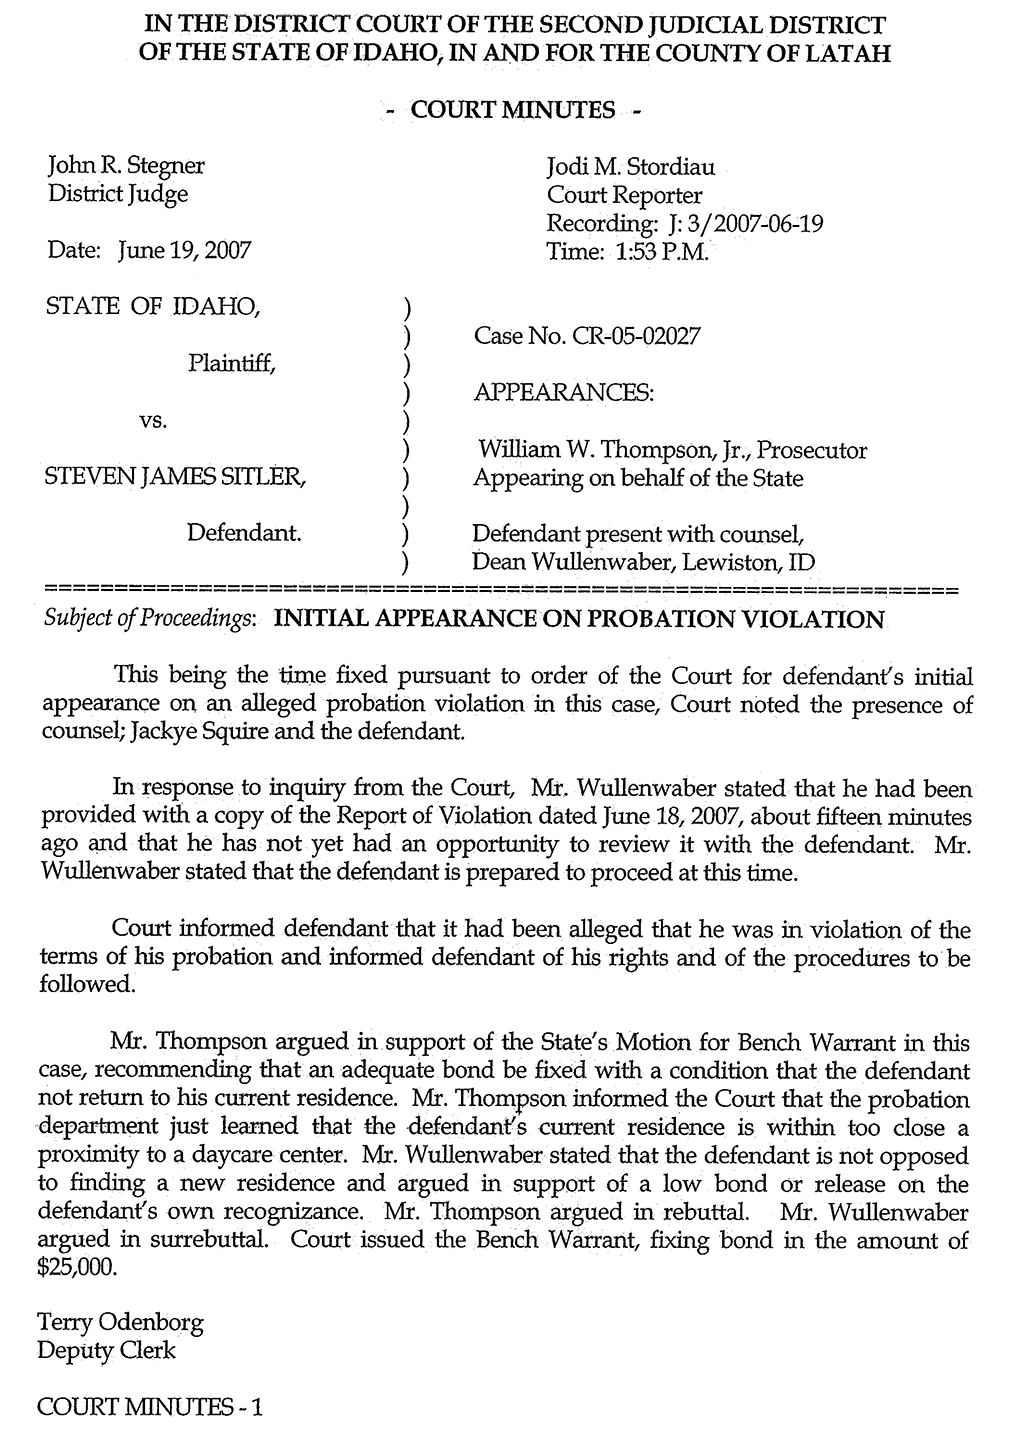 Court Minutes page 1